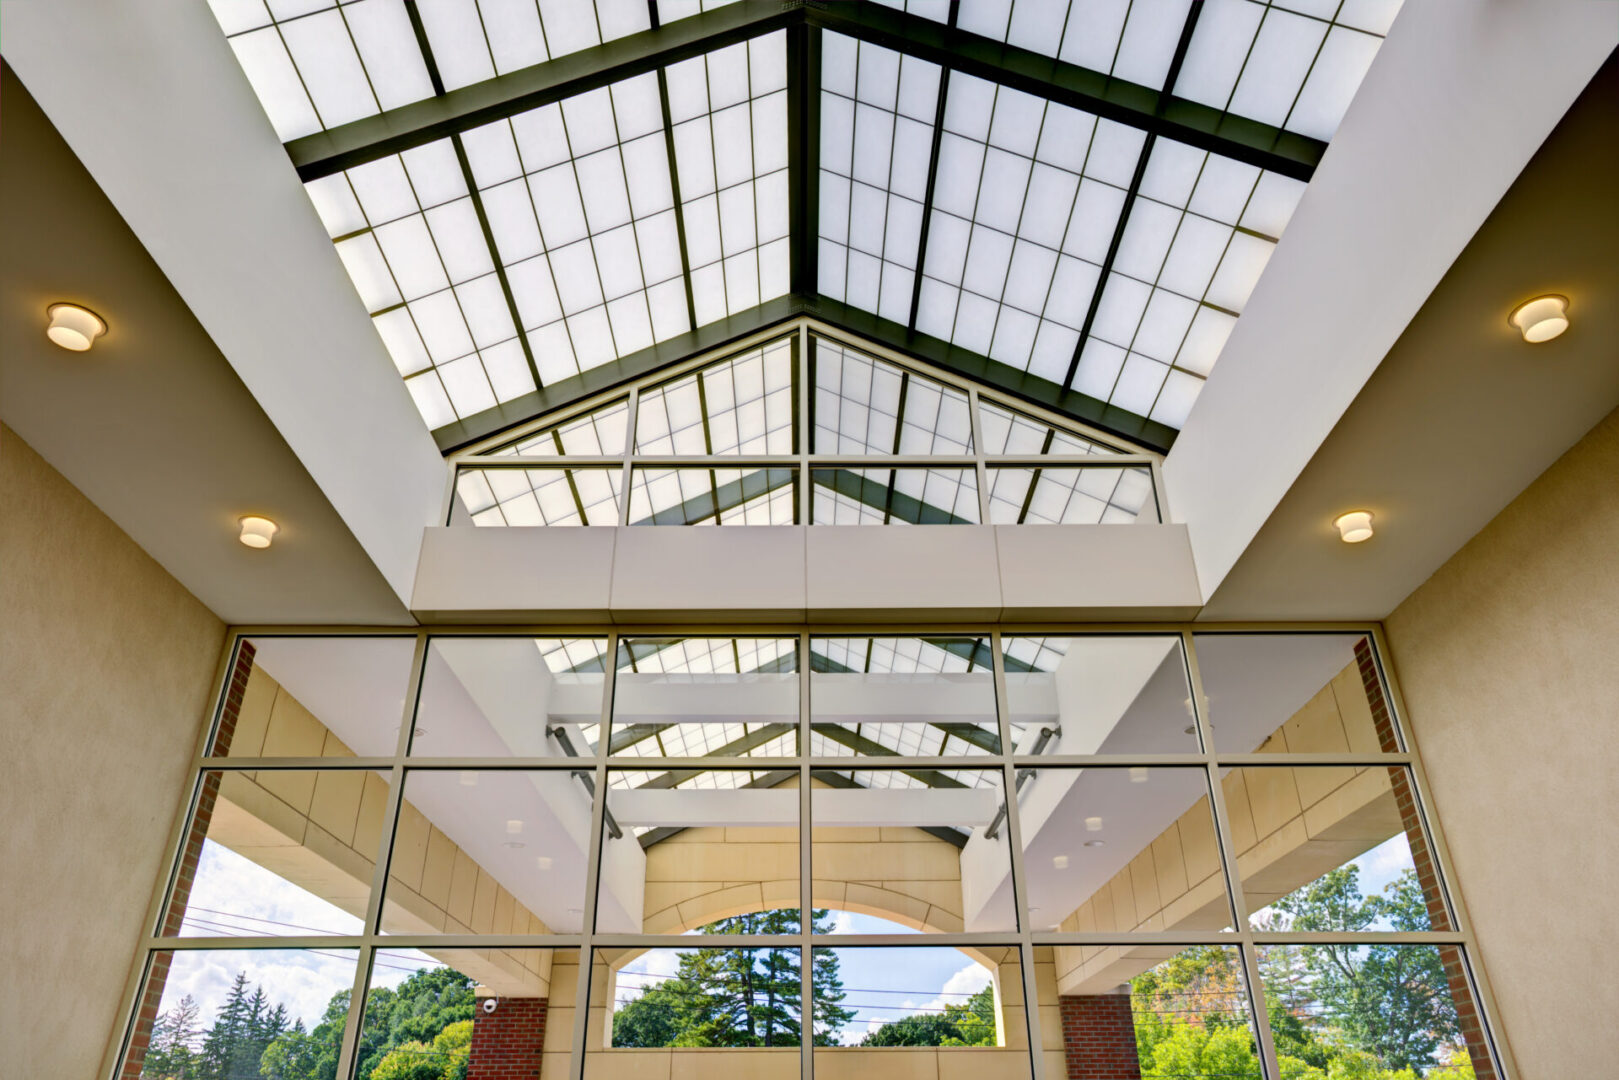 A large glass ceiling in an indoor building.